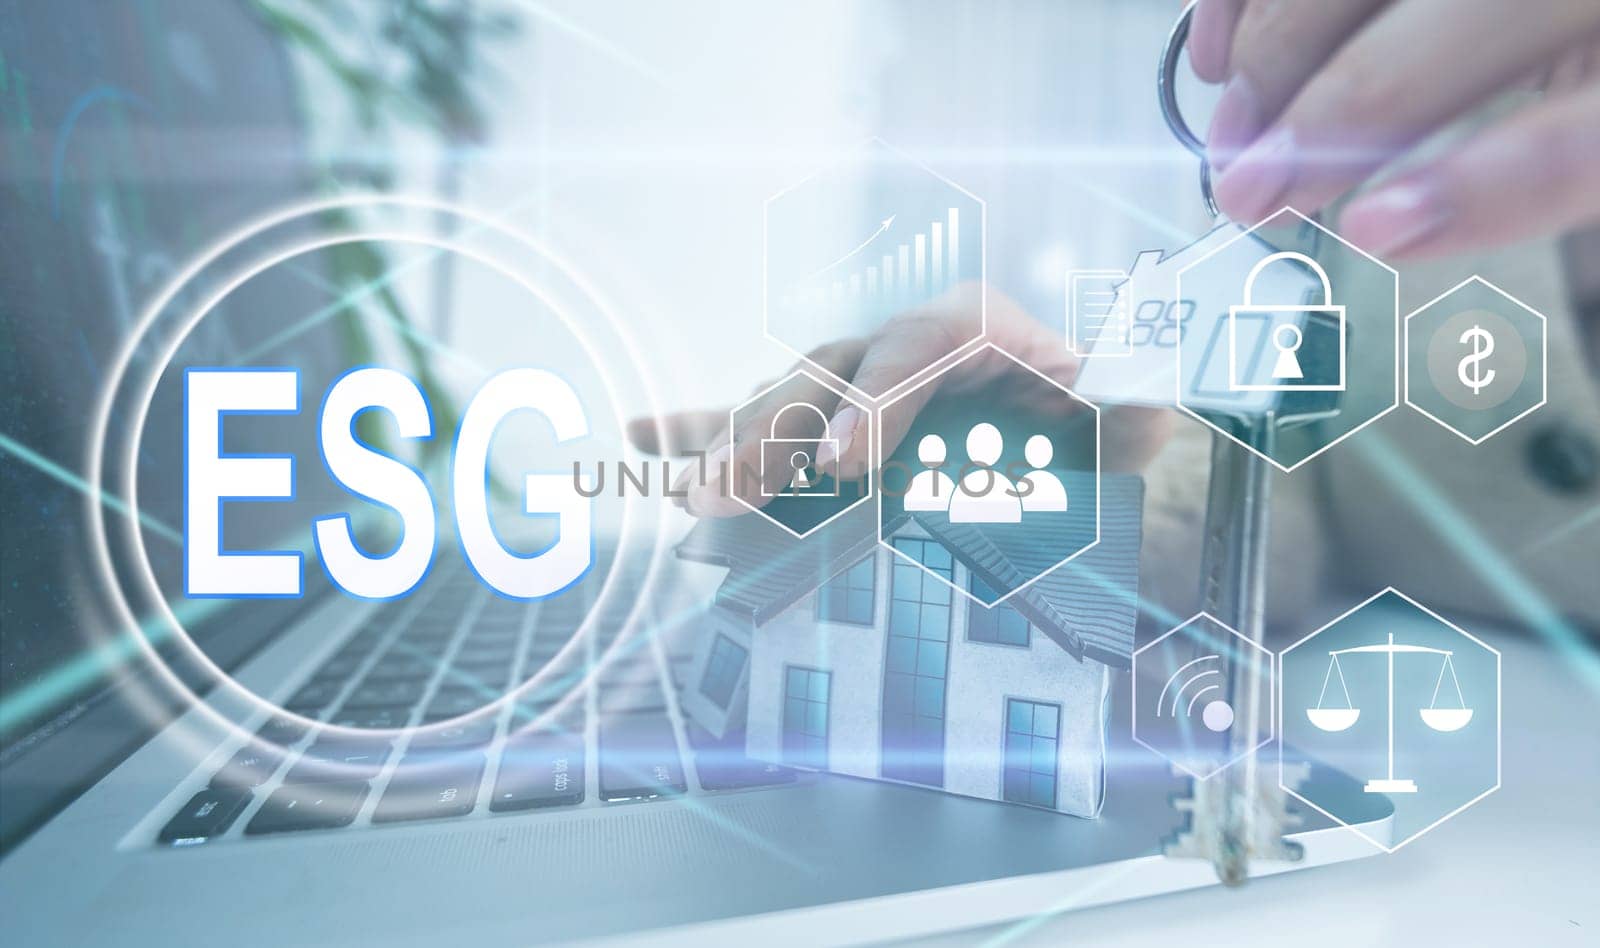 ESG icon concept, virtual screenshot in the concept of environment, society and good governance in sustainable business and ethical on the network.